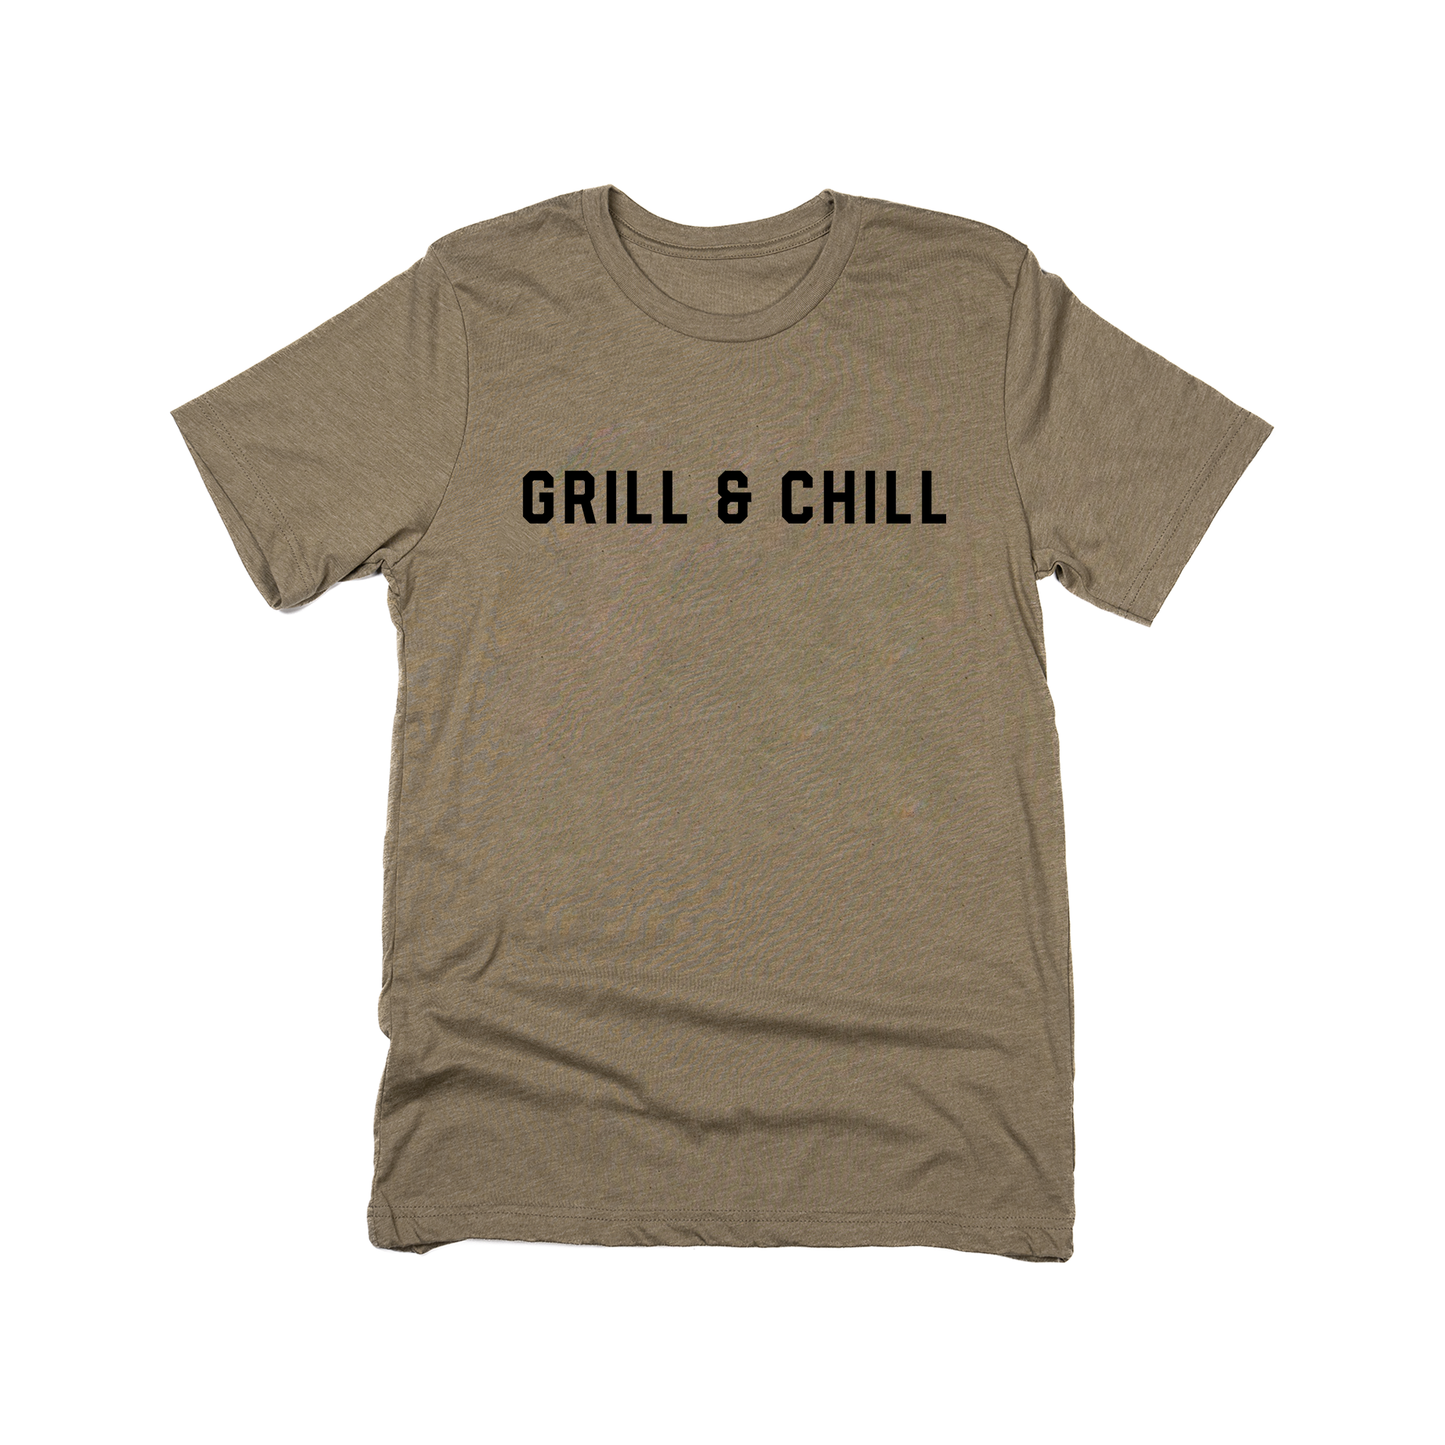 Grill & Chill (Black) - Tee (Olive)